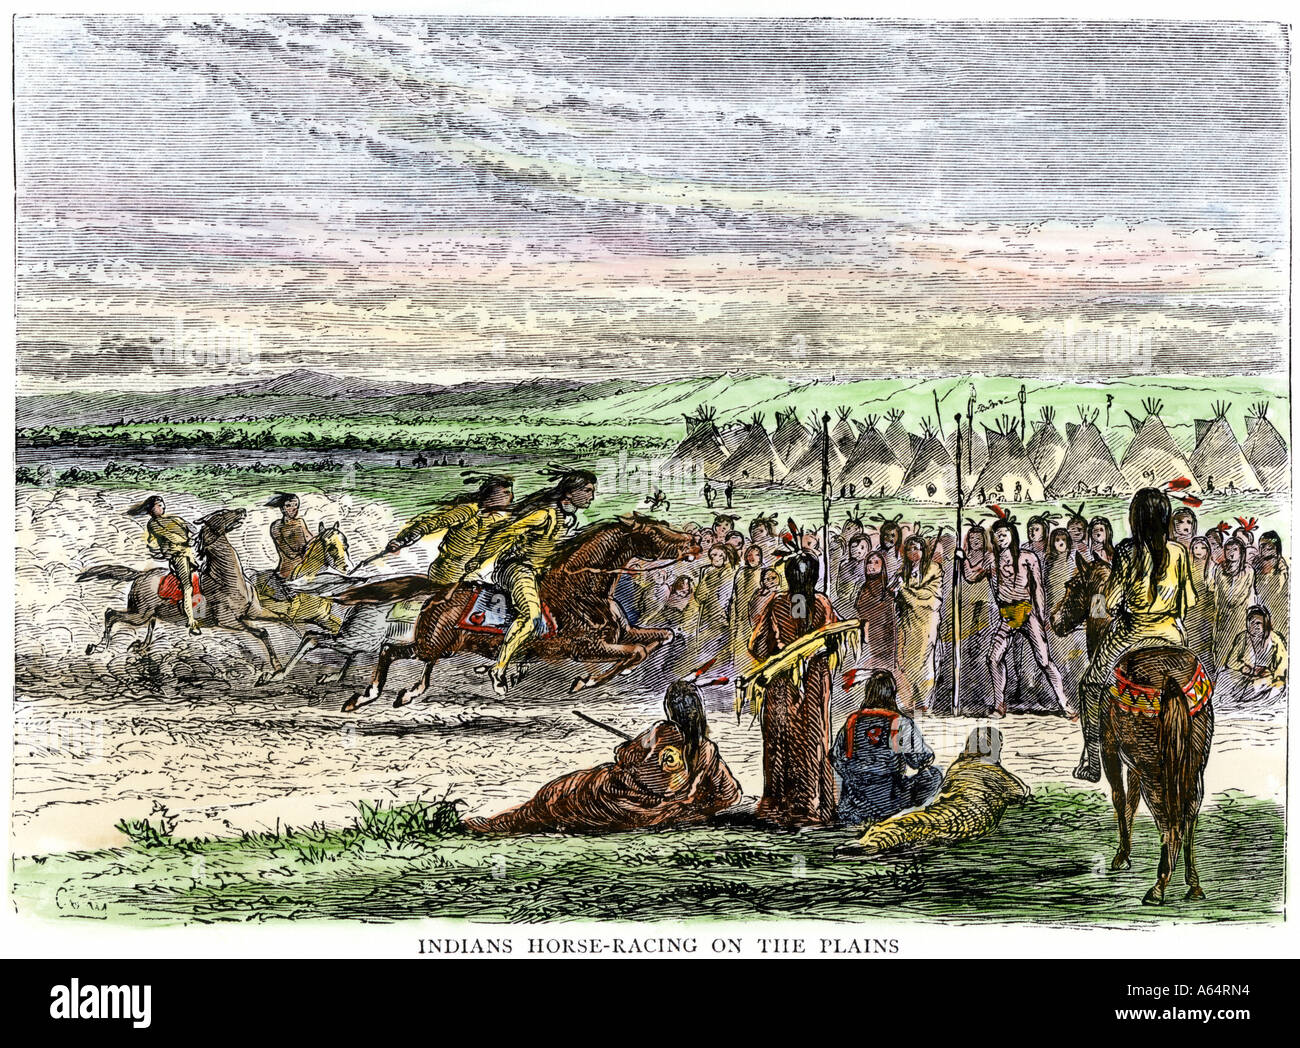 Native Americans horse racing near a tipi village on the Great Plains 1800s. Hand-colored woodcut Stock Photo